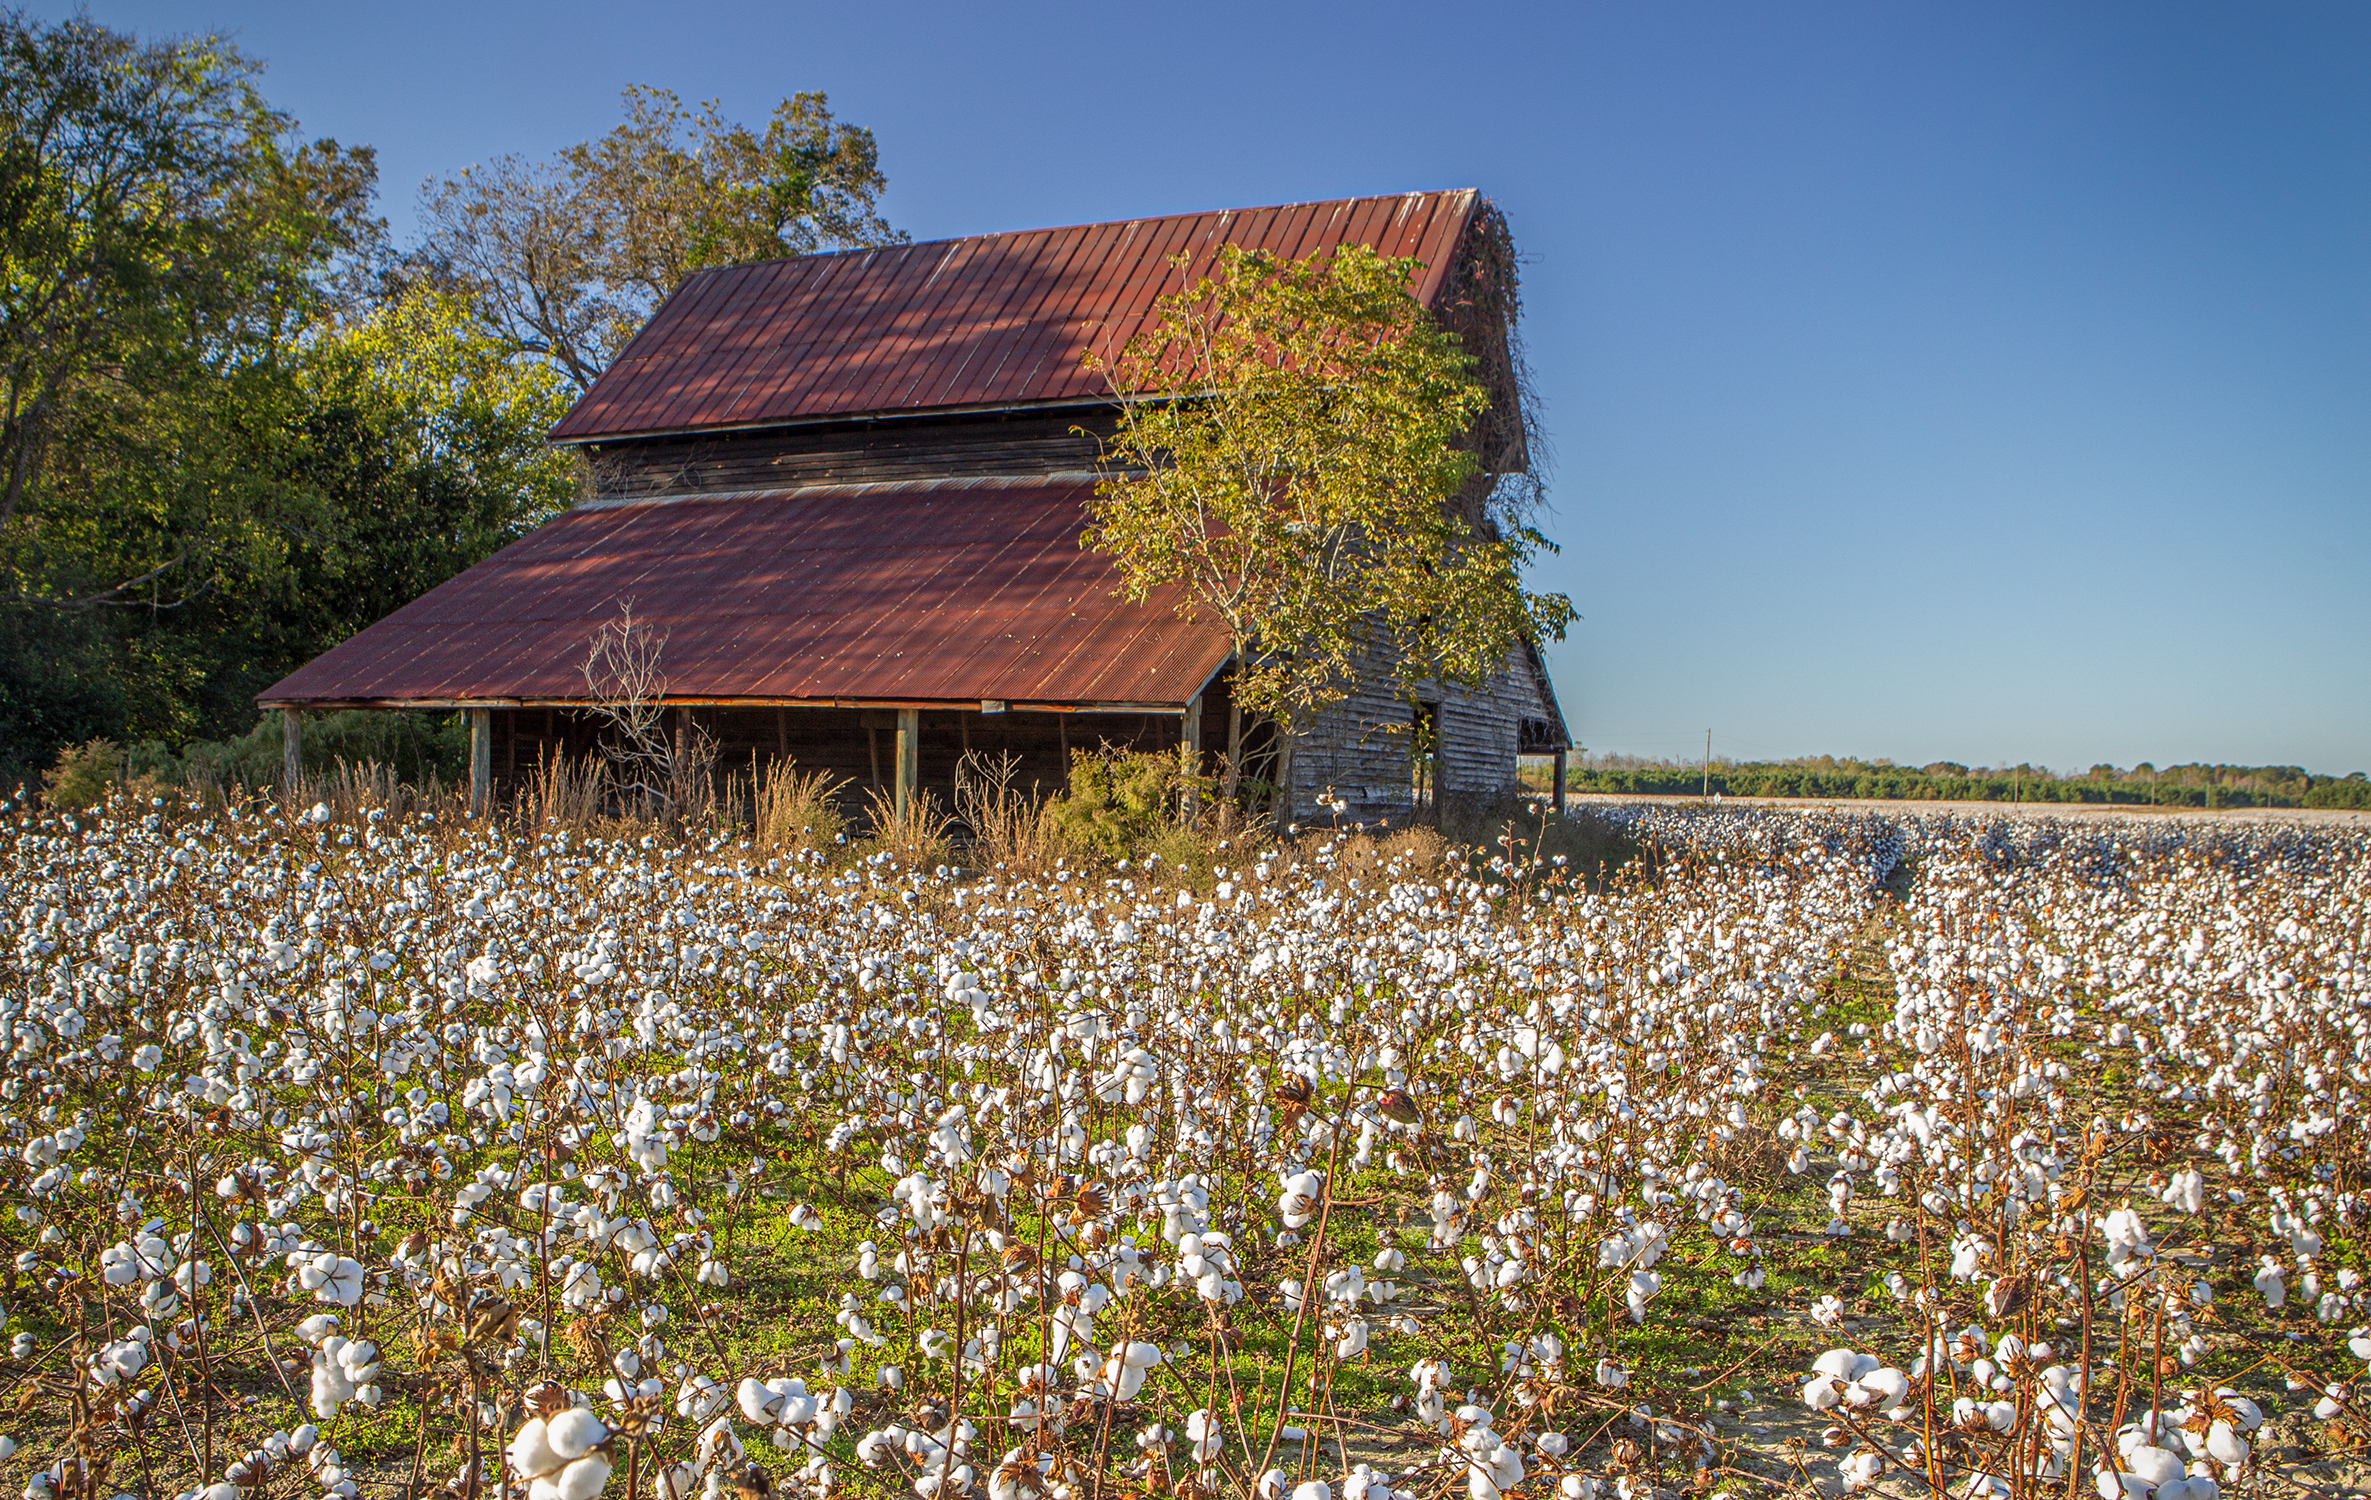 Back in Time — Another year passes for this abandoned barn, which likely was a tobacco leaf drying barn in years past. The demise of tobacco farming led to more cotton and soybean farming in South Carolina.
